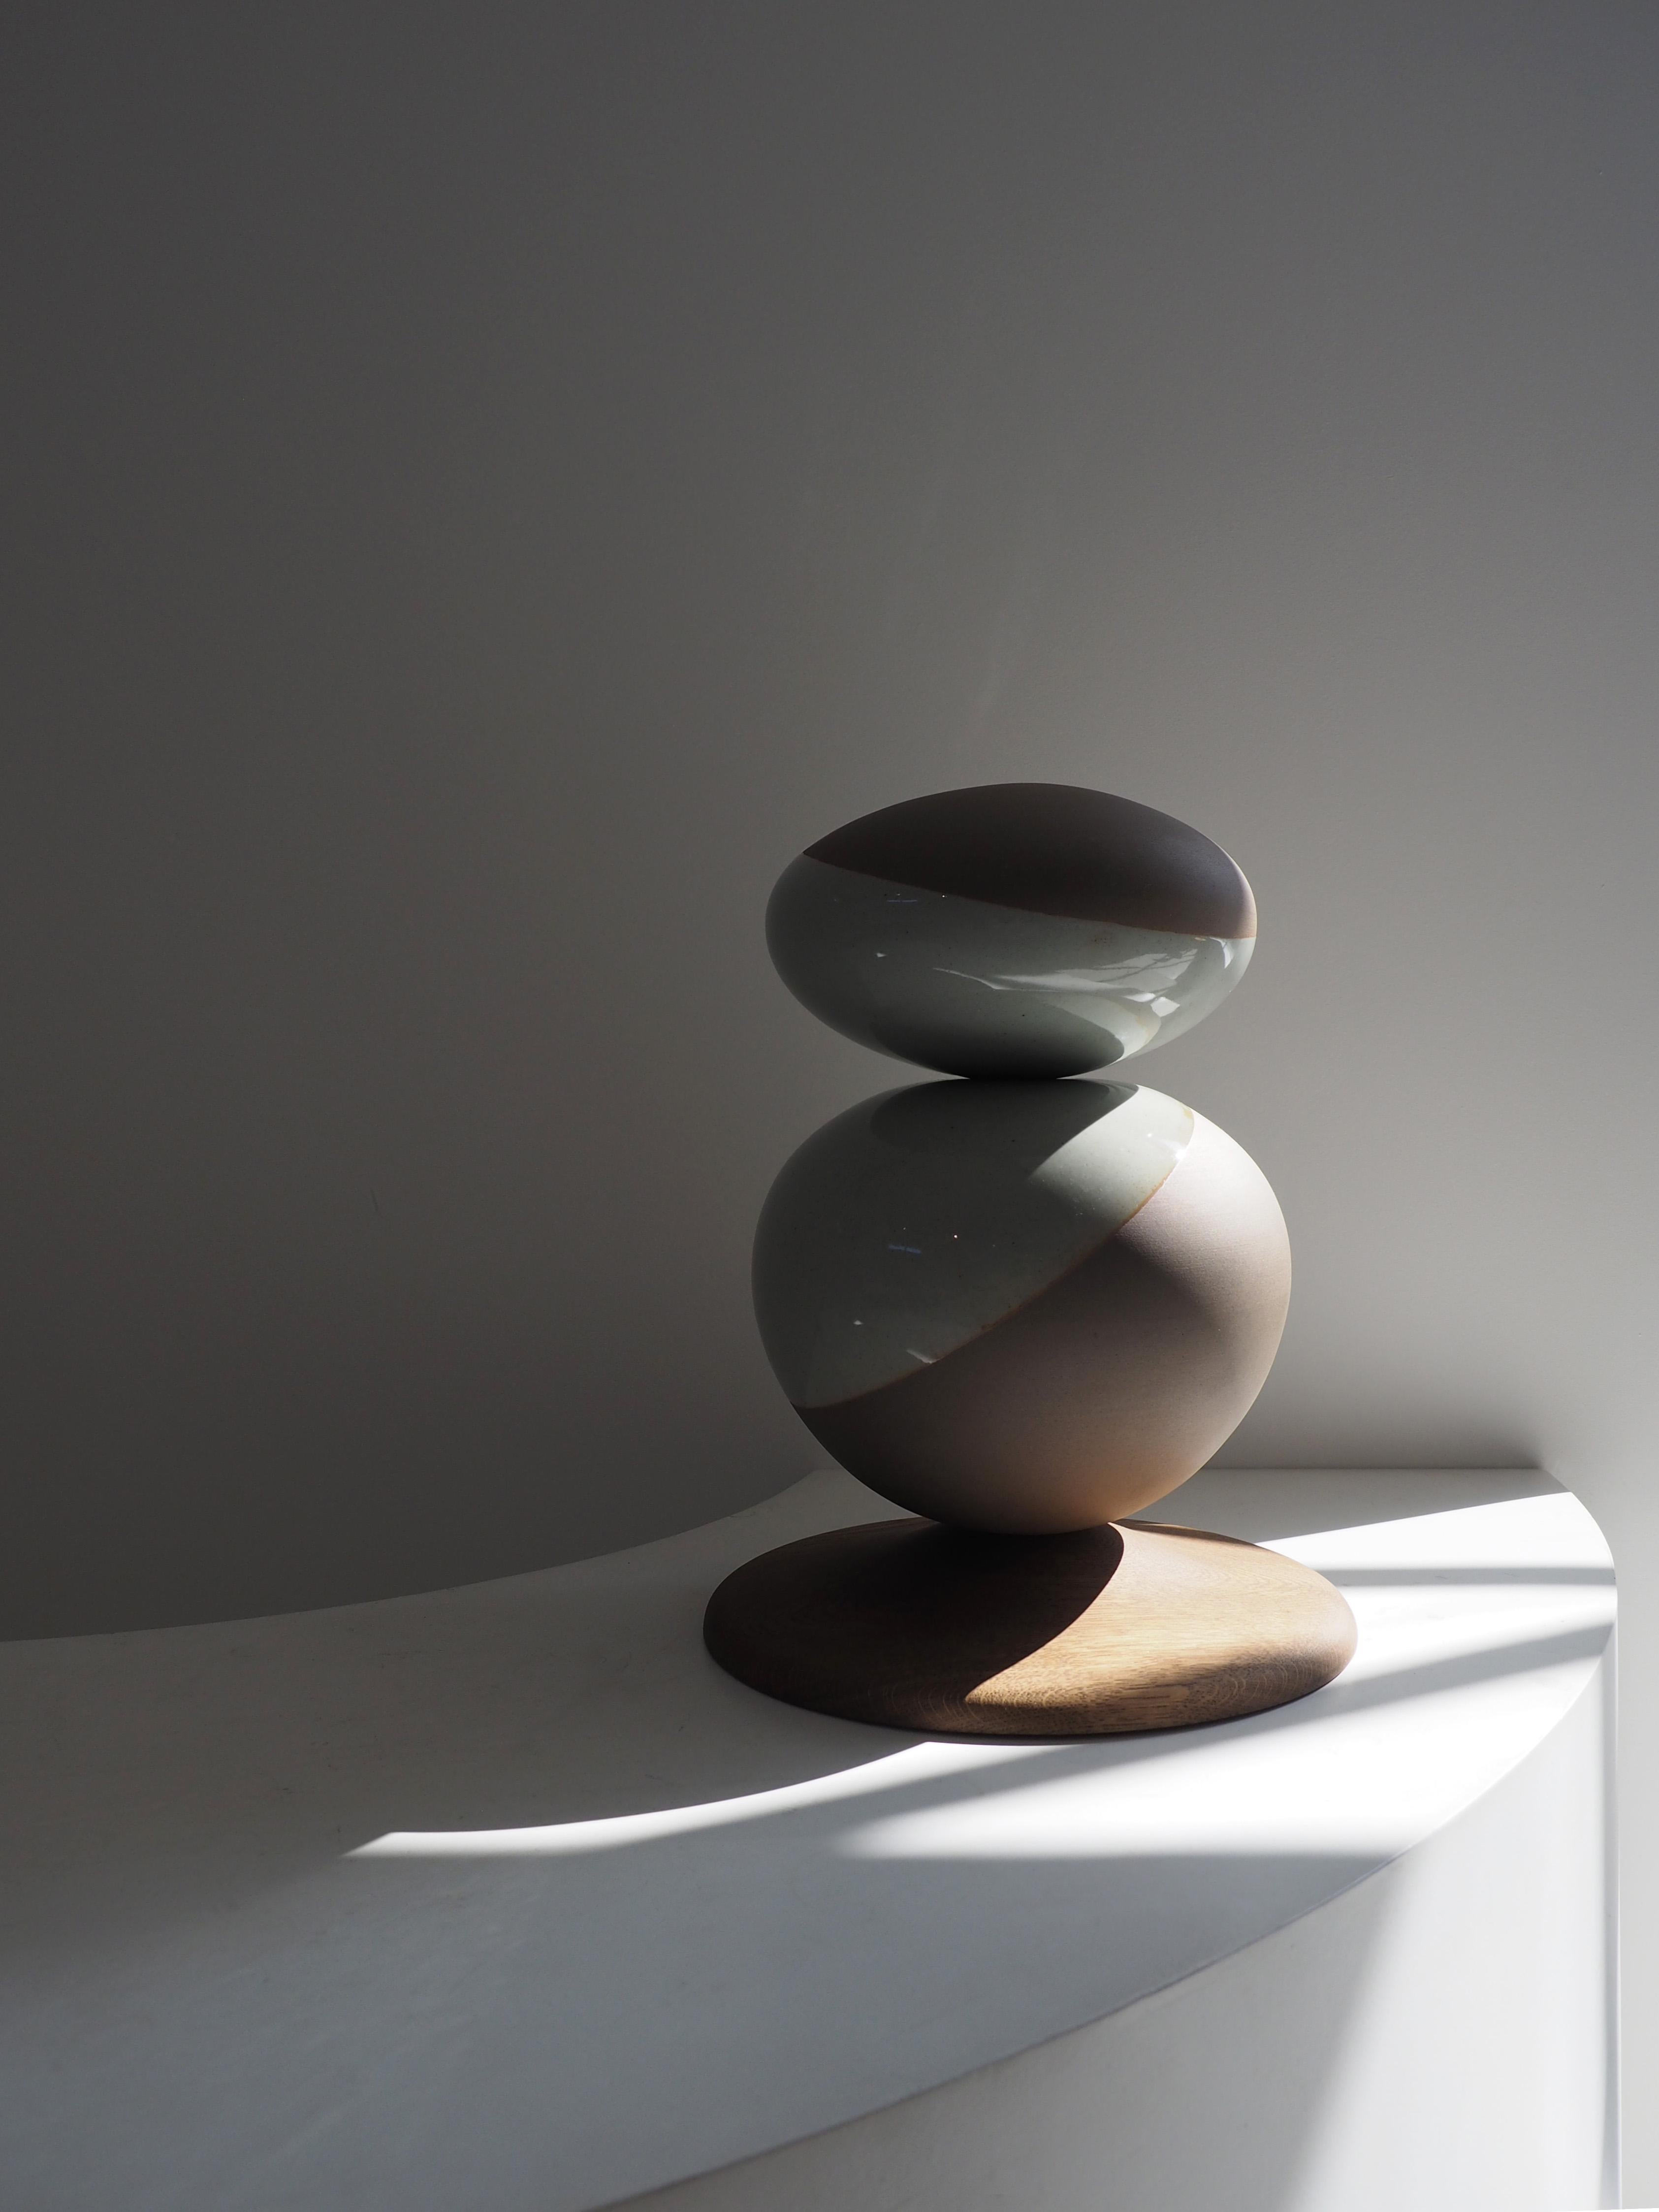 Stack Sculpture Pair by Soo Joo is a stack sculpture made in Korean Ceramic. It is a timeless form, reminiscent of a pair of perfectly balanced river stones. The stack sculpture series is created with traditional Korean aesthetics in mind, using